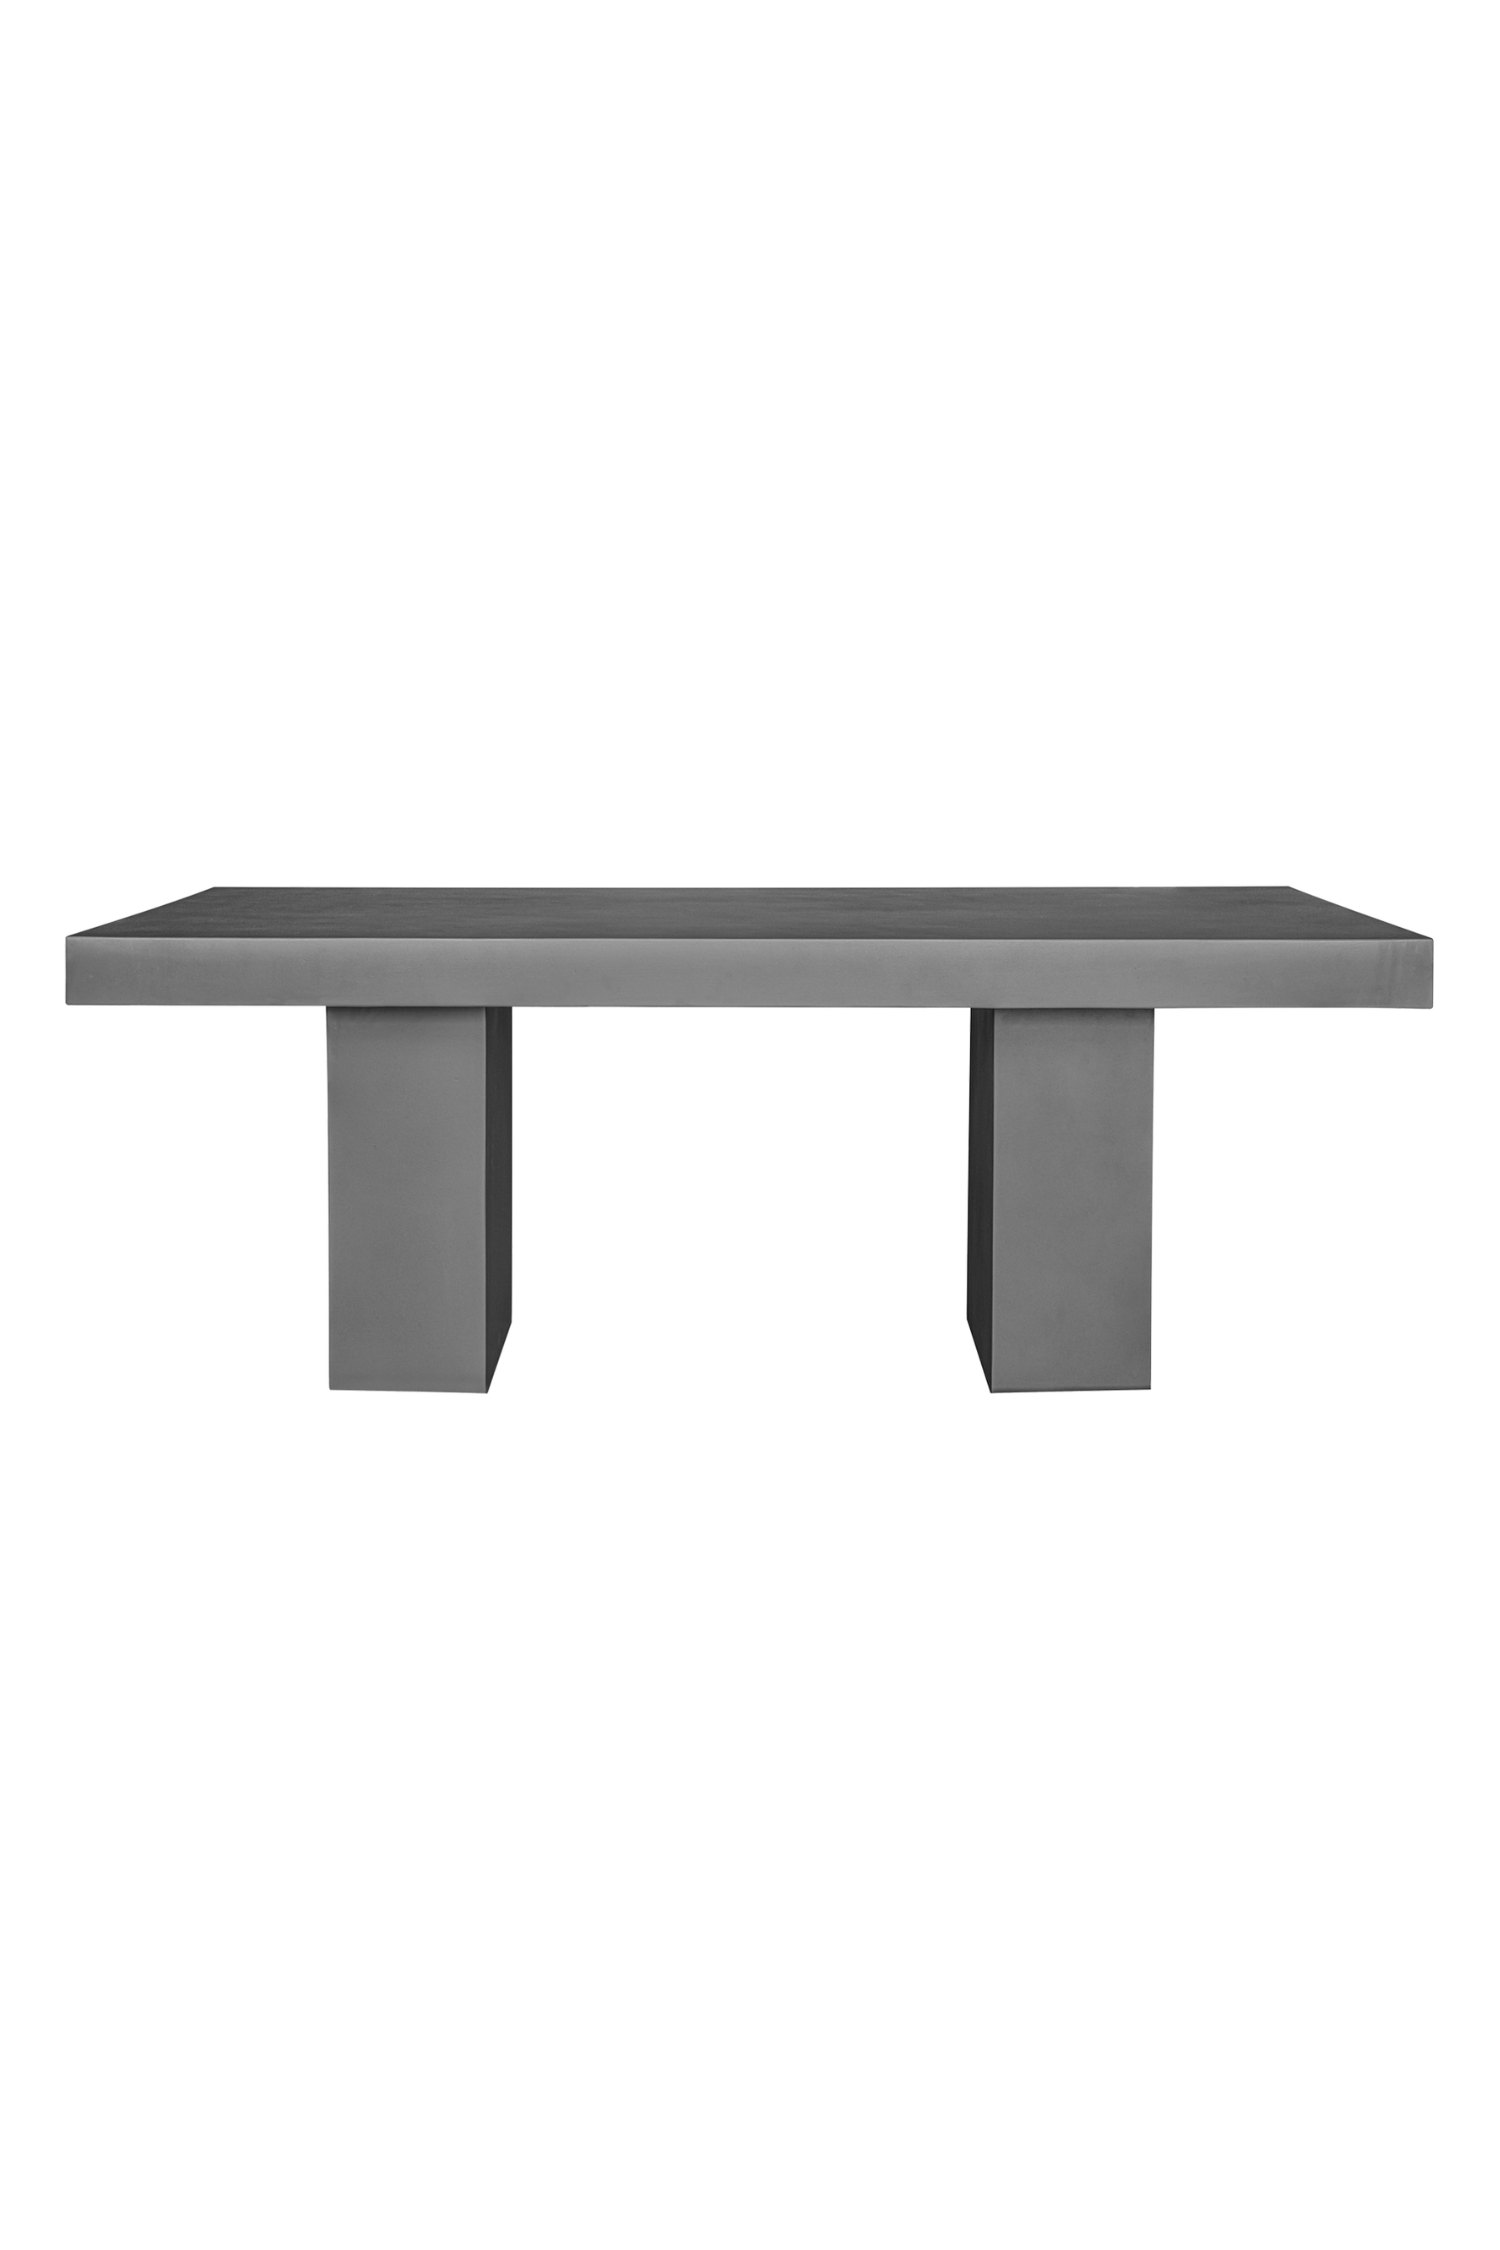 Olen Outdoor Dining Table